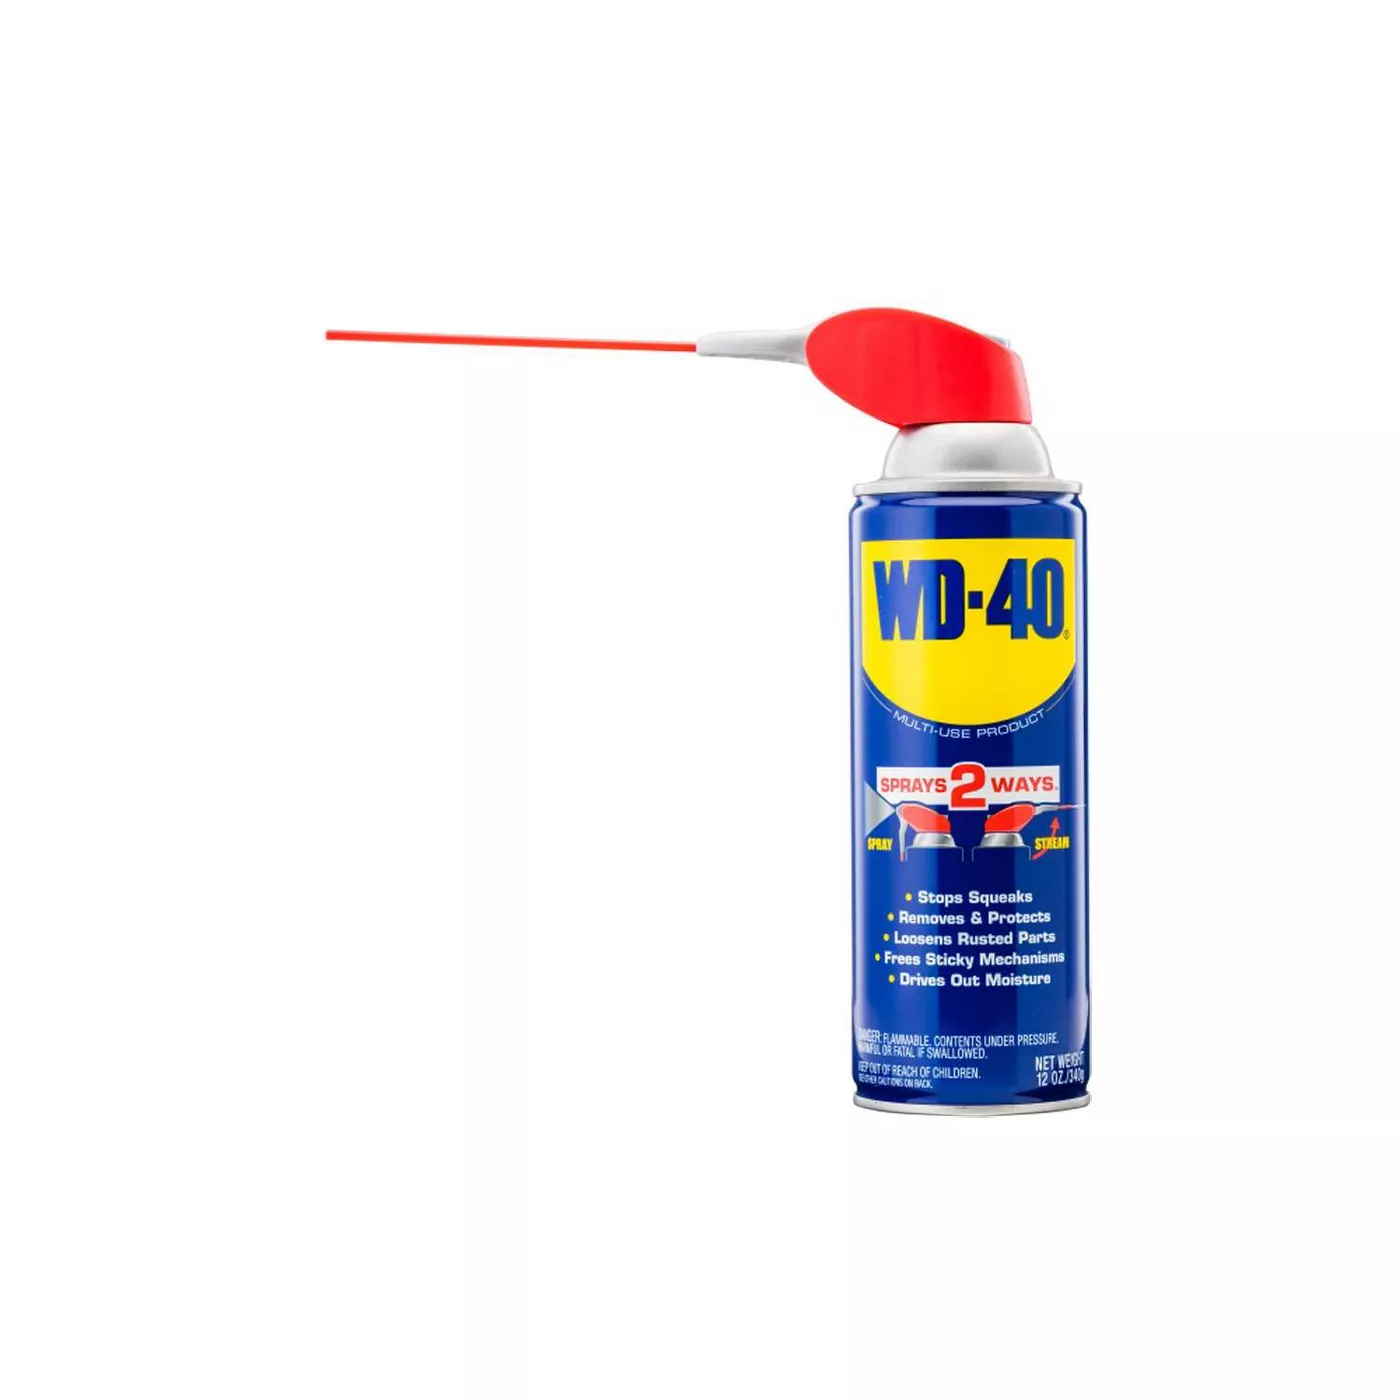 WD-40 12oz Industrial Lubricants Multi-Use Product with Smart Straw Spray - image 1 of 8